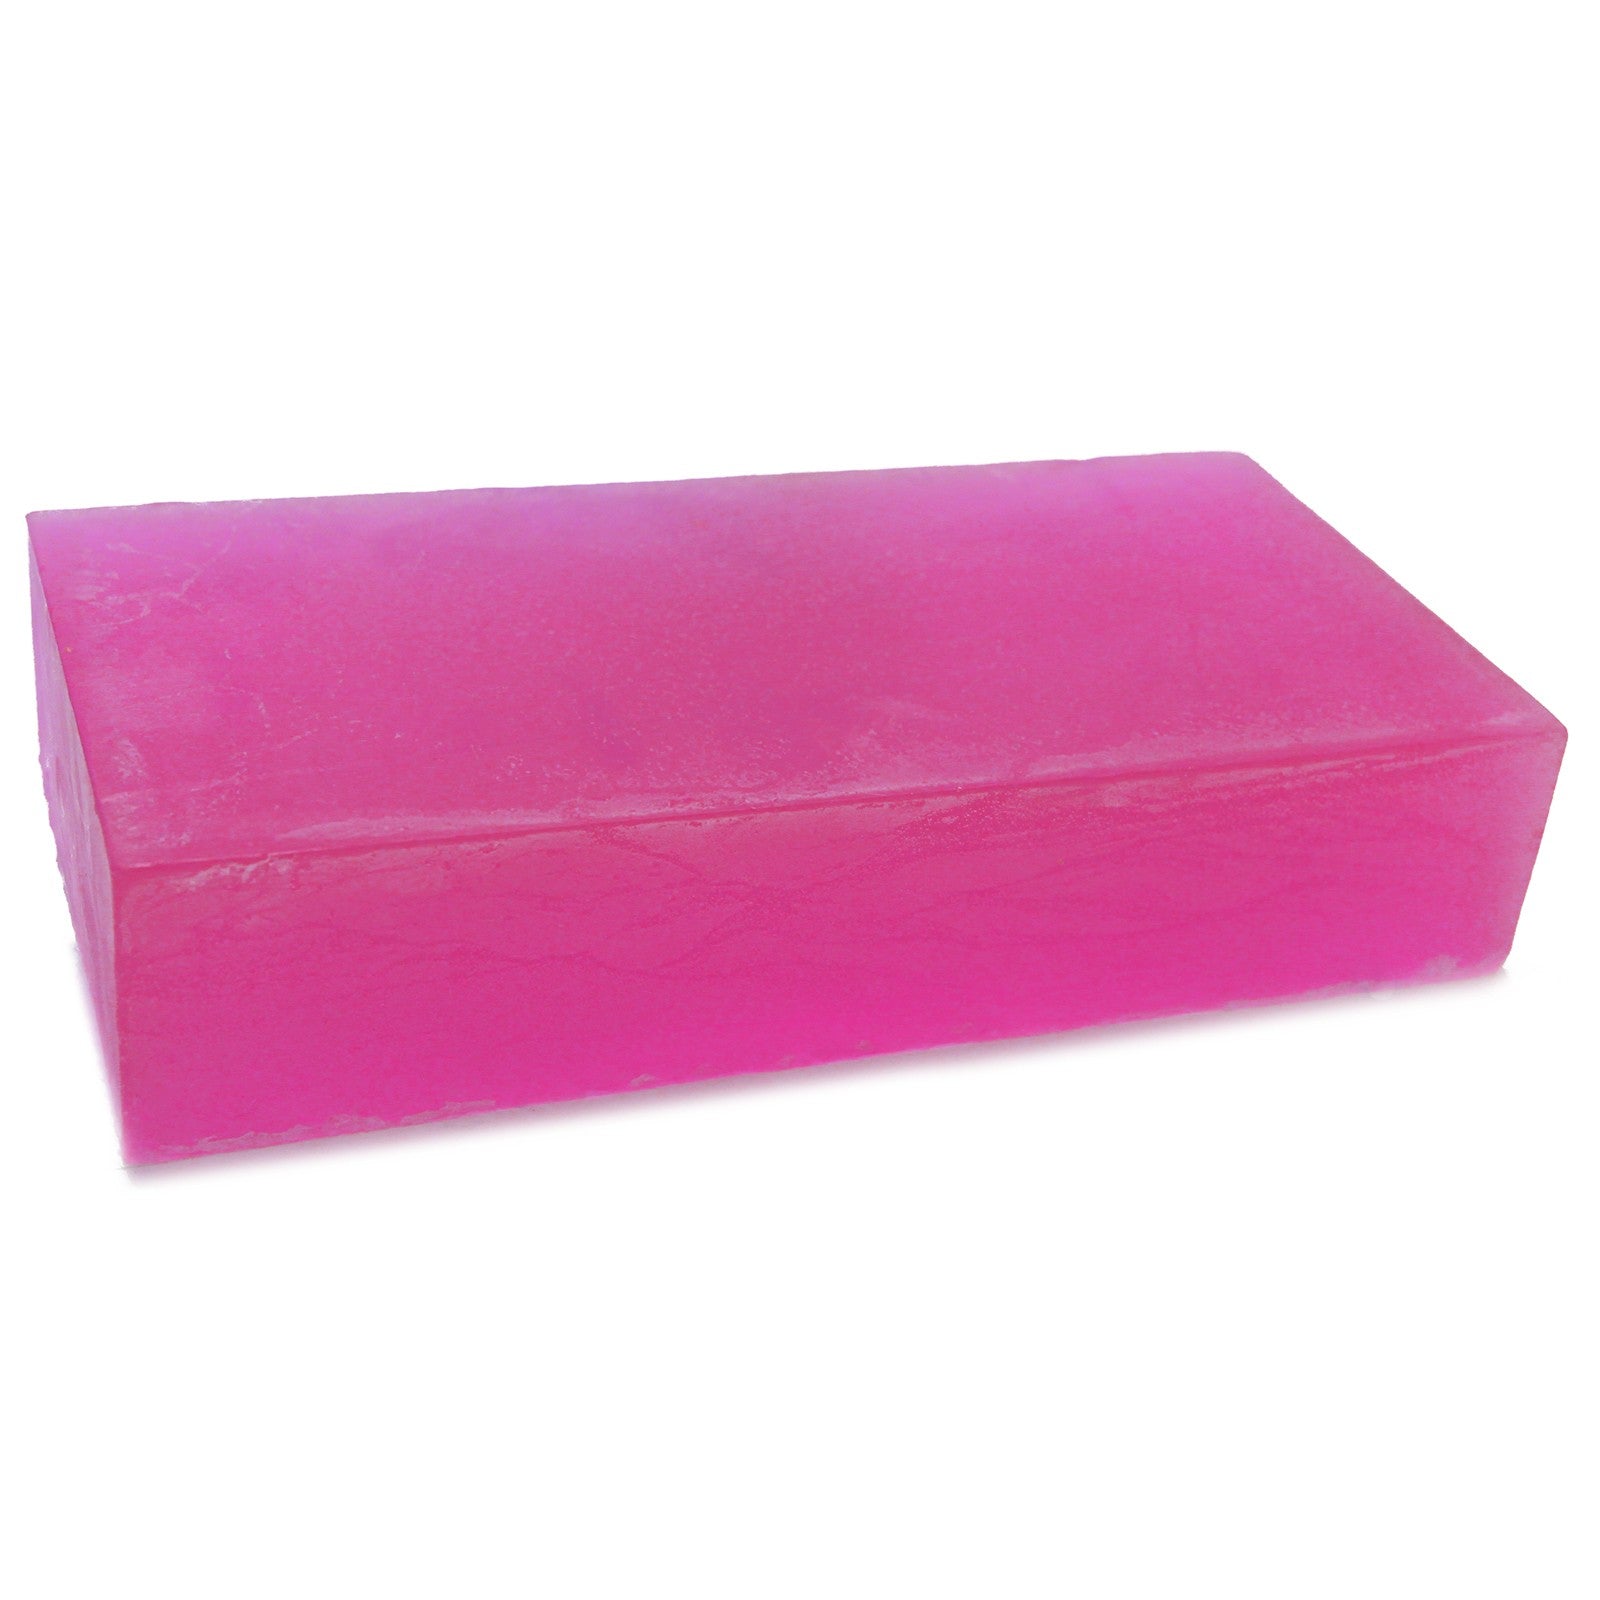 Rosemary Essential Oil Soap Loaf - 2kg - £45.0 - 